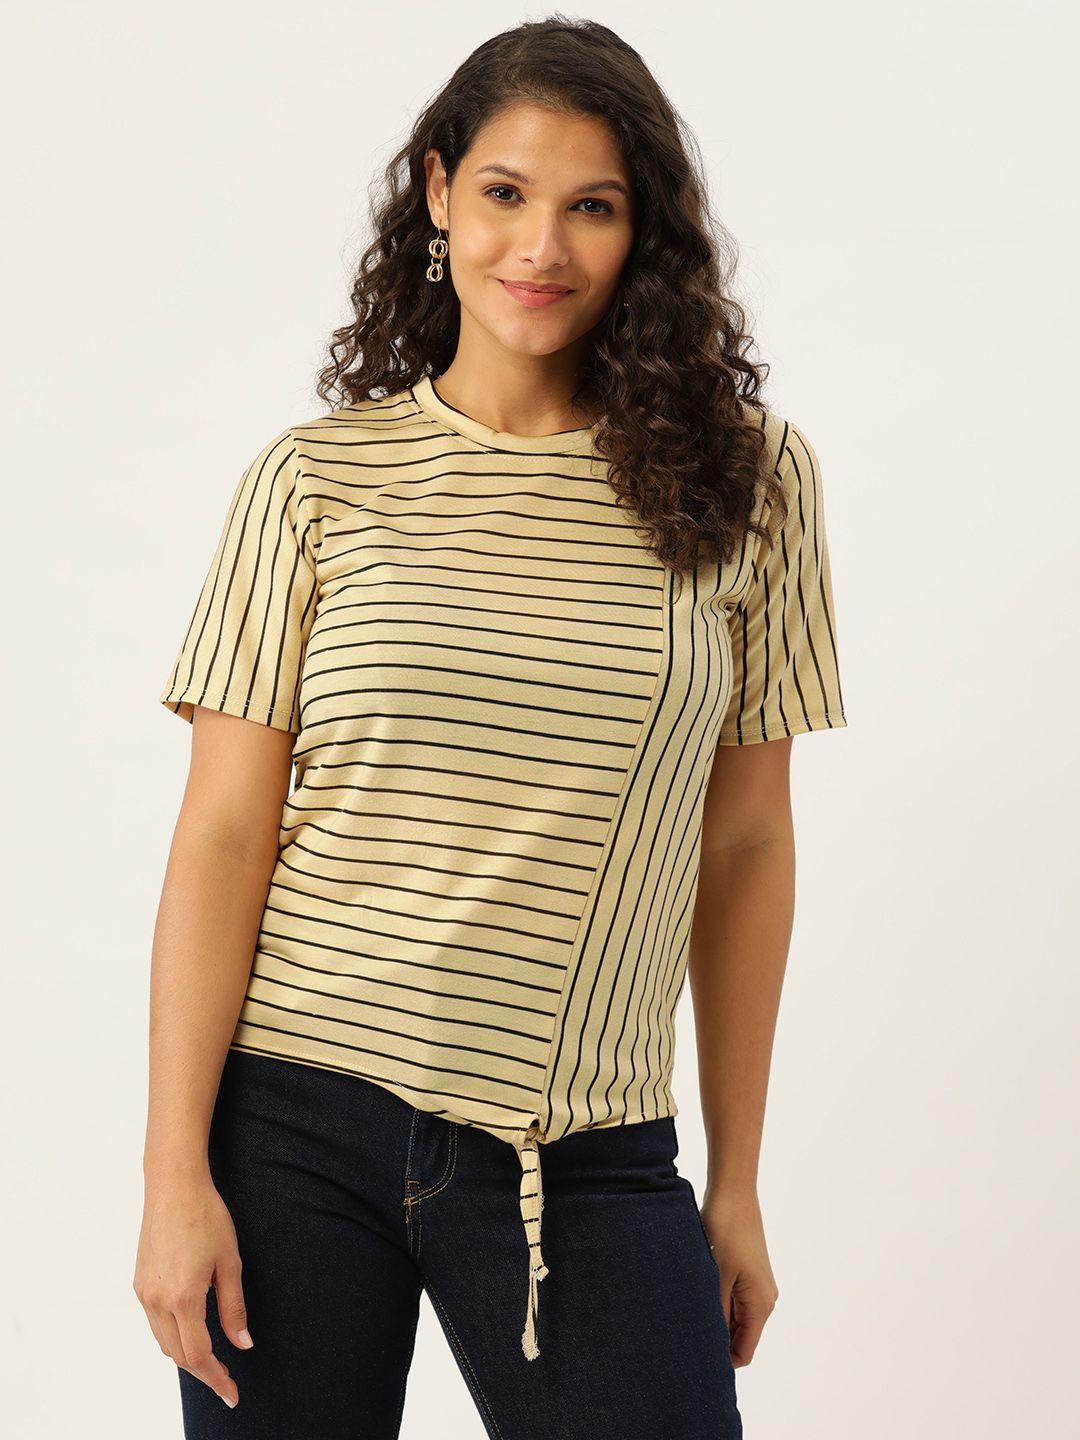 belle-fille-yellow-striped-top